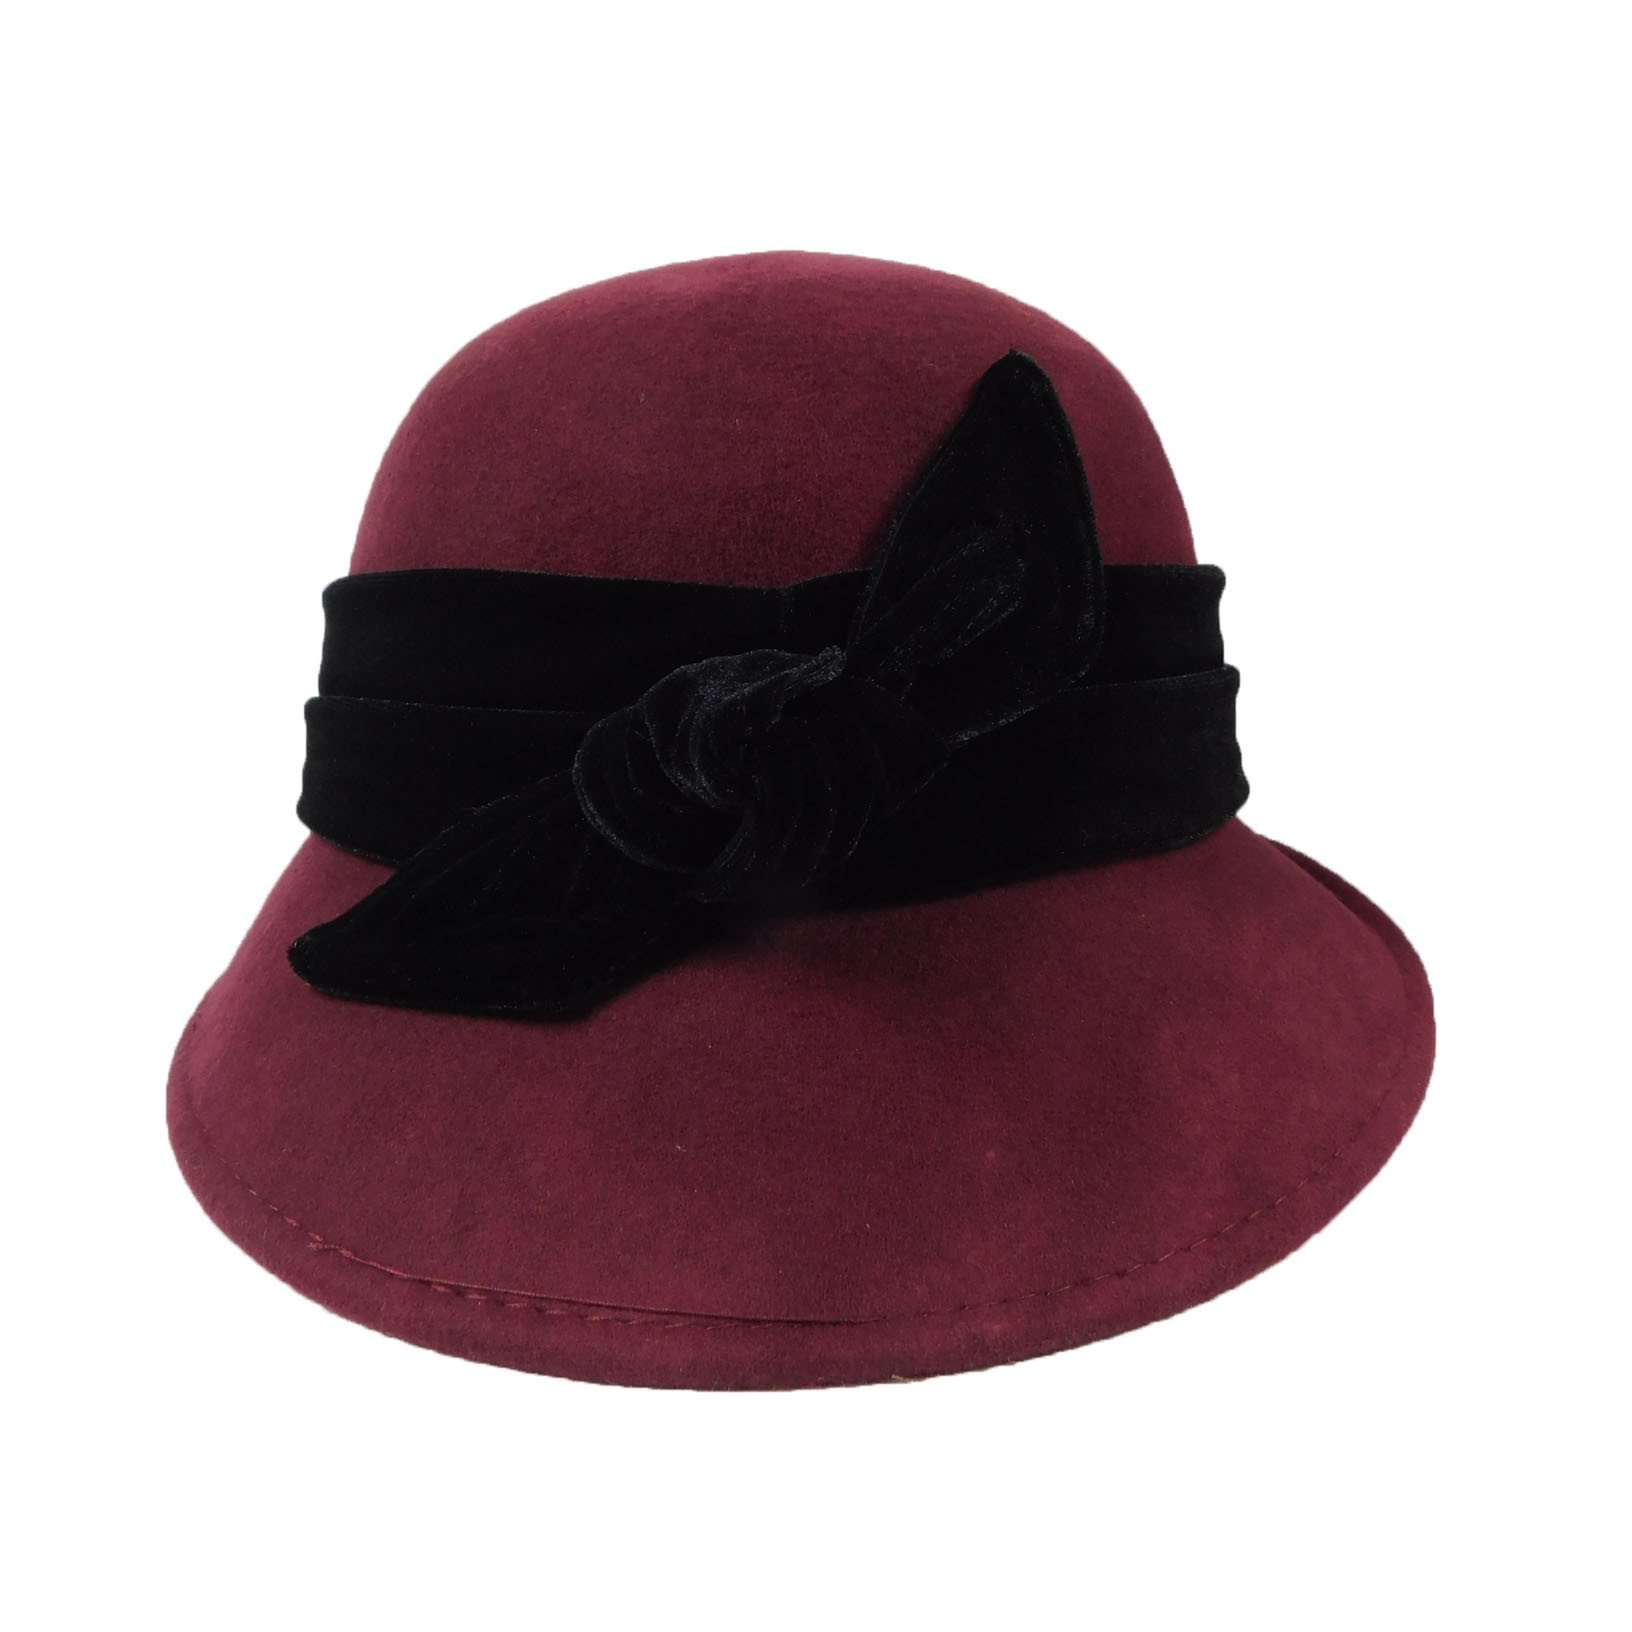 Curled Brim Slanted Cloche Wool Hat with Velvet Bow - Scala Hats